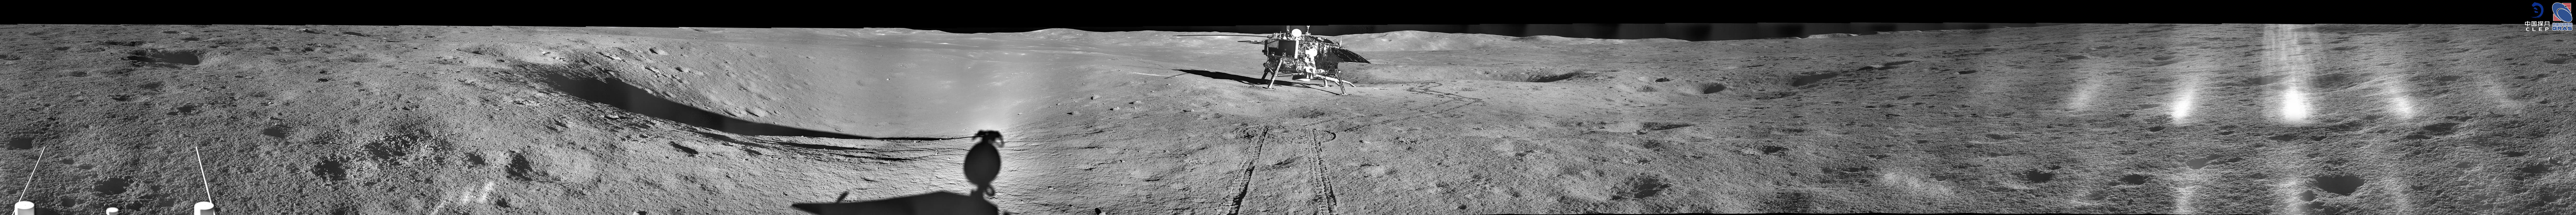 Far side of the Moon seen in this panorama image from the early days of the mission. Credit: CLEP/ Lunar and Planetary Multimedia Database